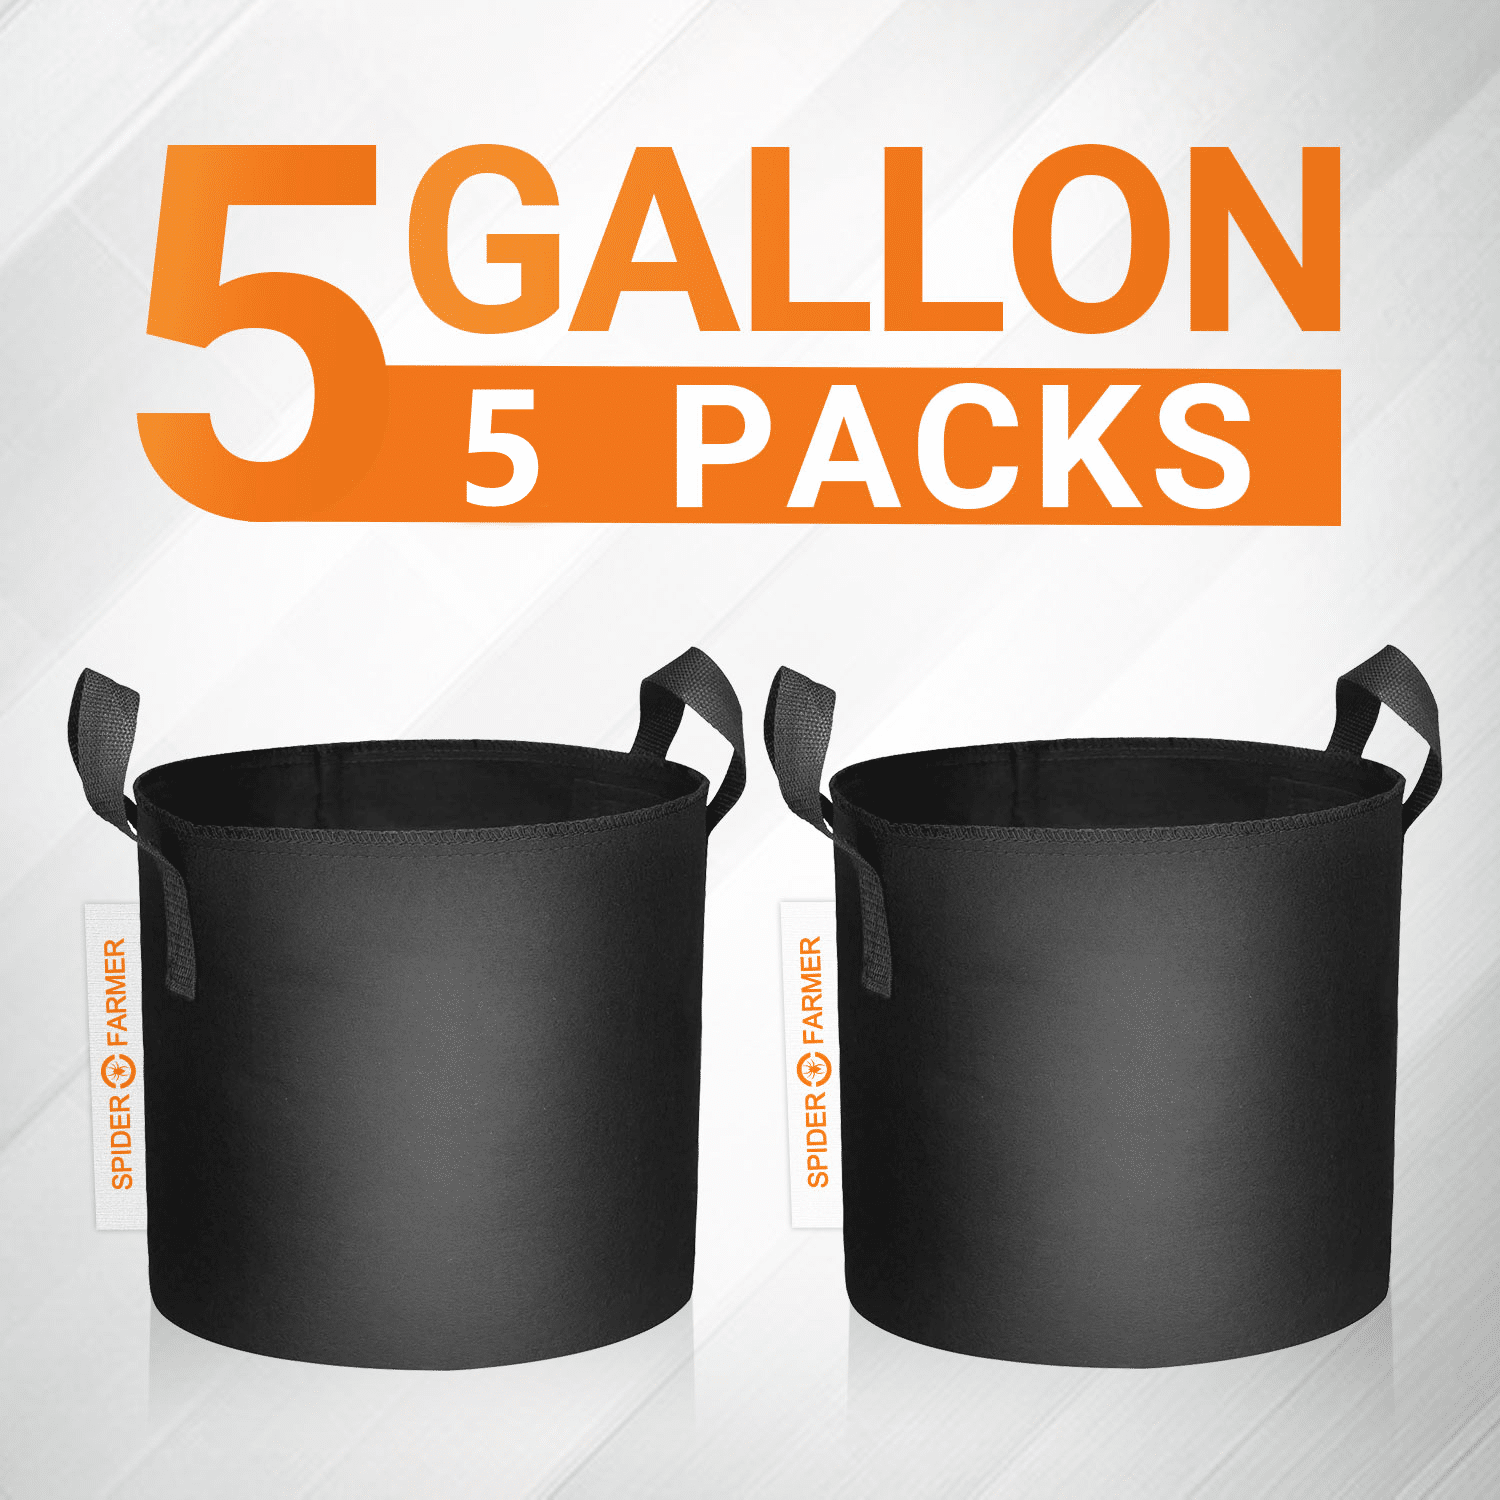 Kensizer 5-Pack 5 Gallons Plant Grow Bags 300G Premium Series Thickened Non-Woven Breathable Fabric Pots Reinforced Weight Capacity and Durable Black 